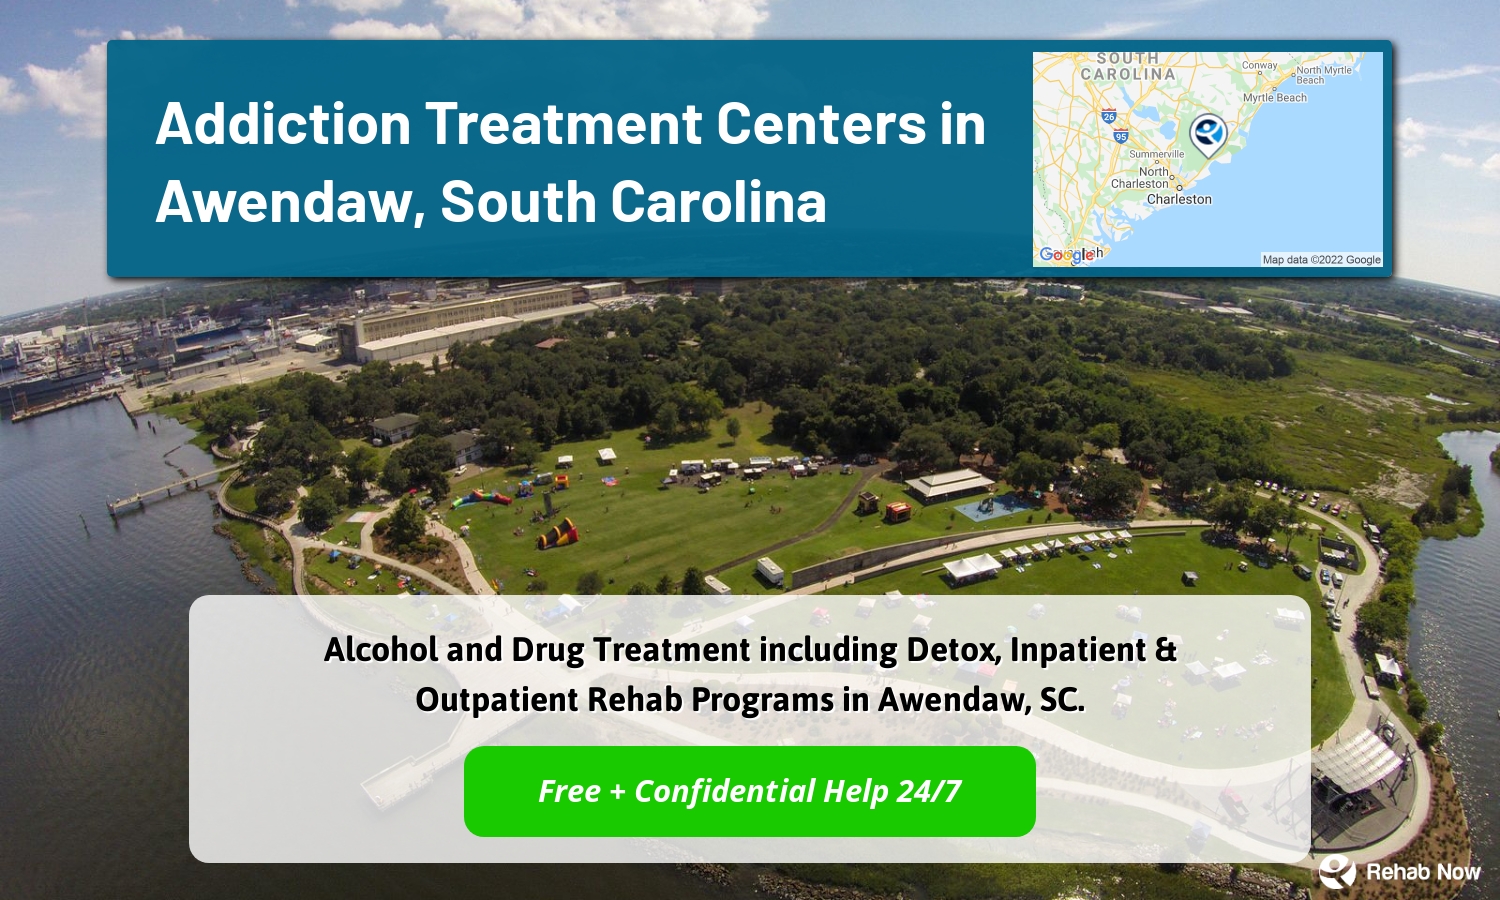 Alcohol and Drug Treatment including Detox, Inpatient & Outpatient Rehab Programs in Awendaw, SC.